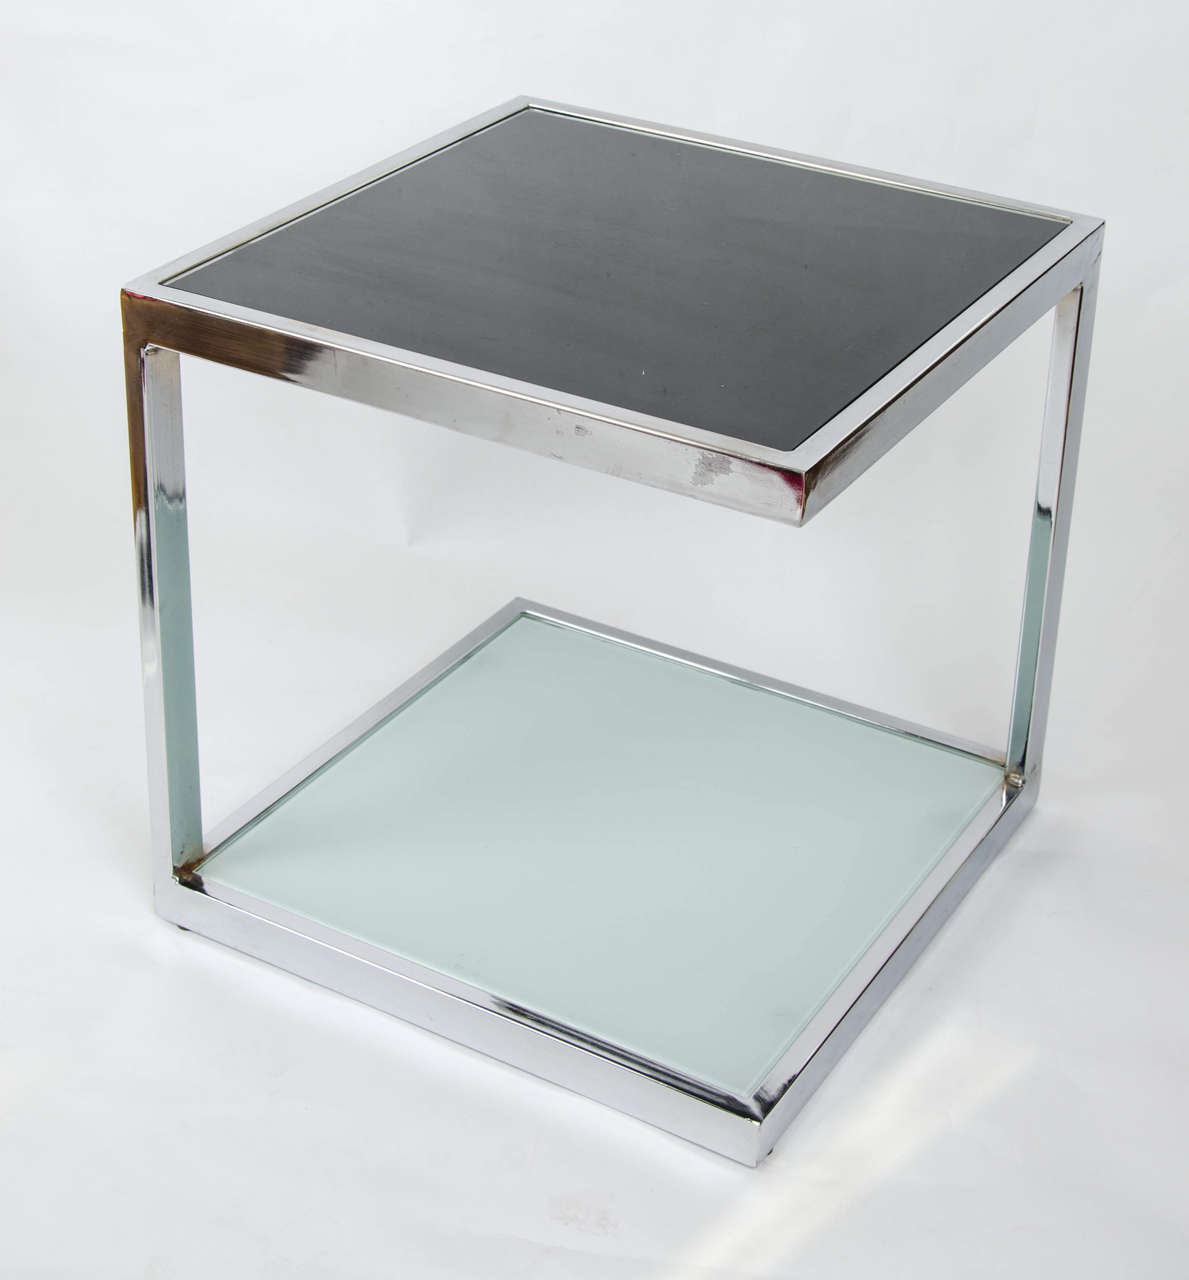 Elegant minimalism. Two pairs of sturdy mid-century French cube side tables in chrome and glass.

Price quoted based on a pair. Four available.